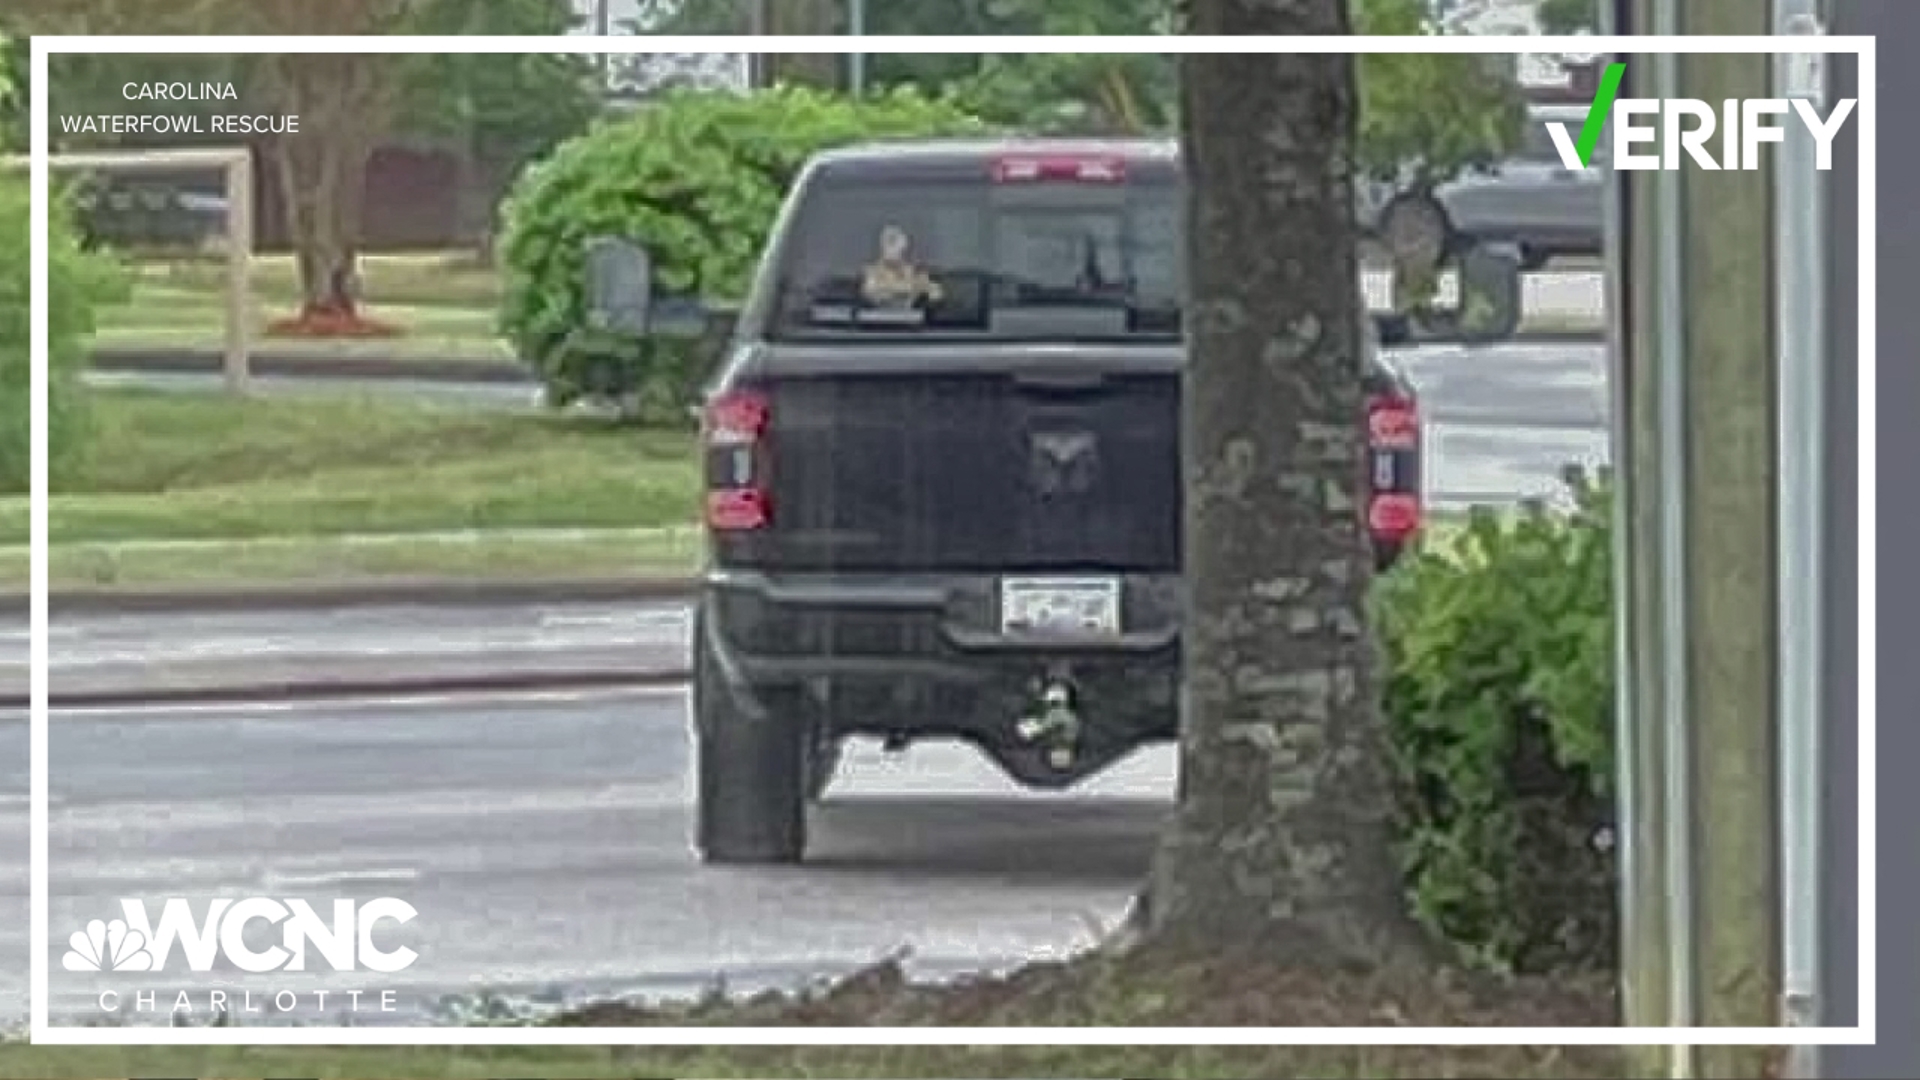 A Charlotte-area rescue released images, witnesses said, showed three people taking wild baby geese from their parents over the weekend.